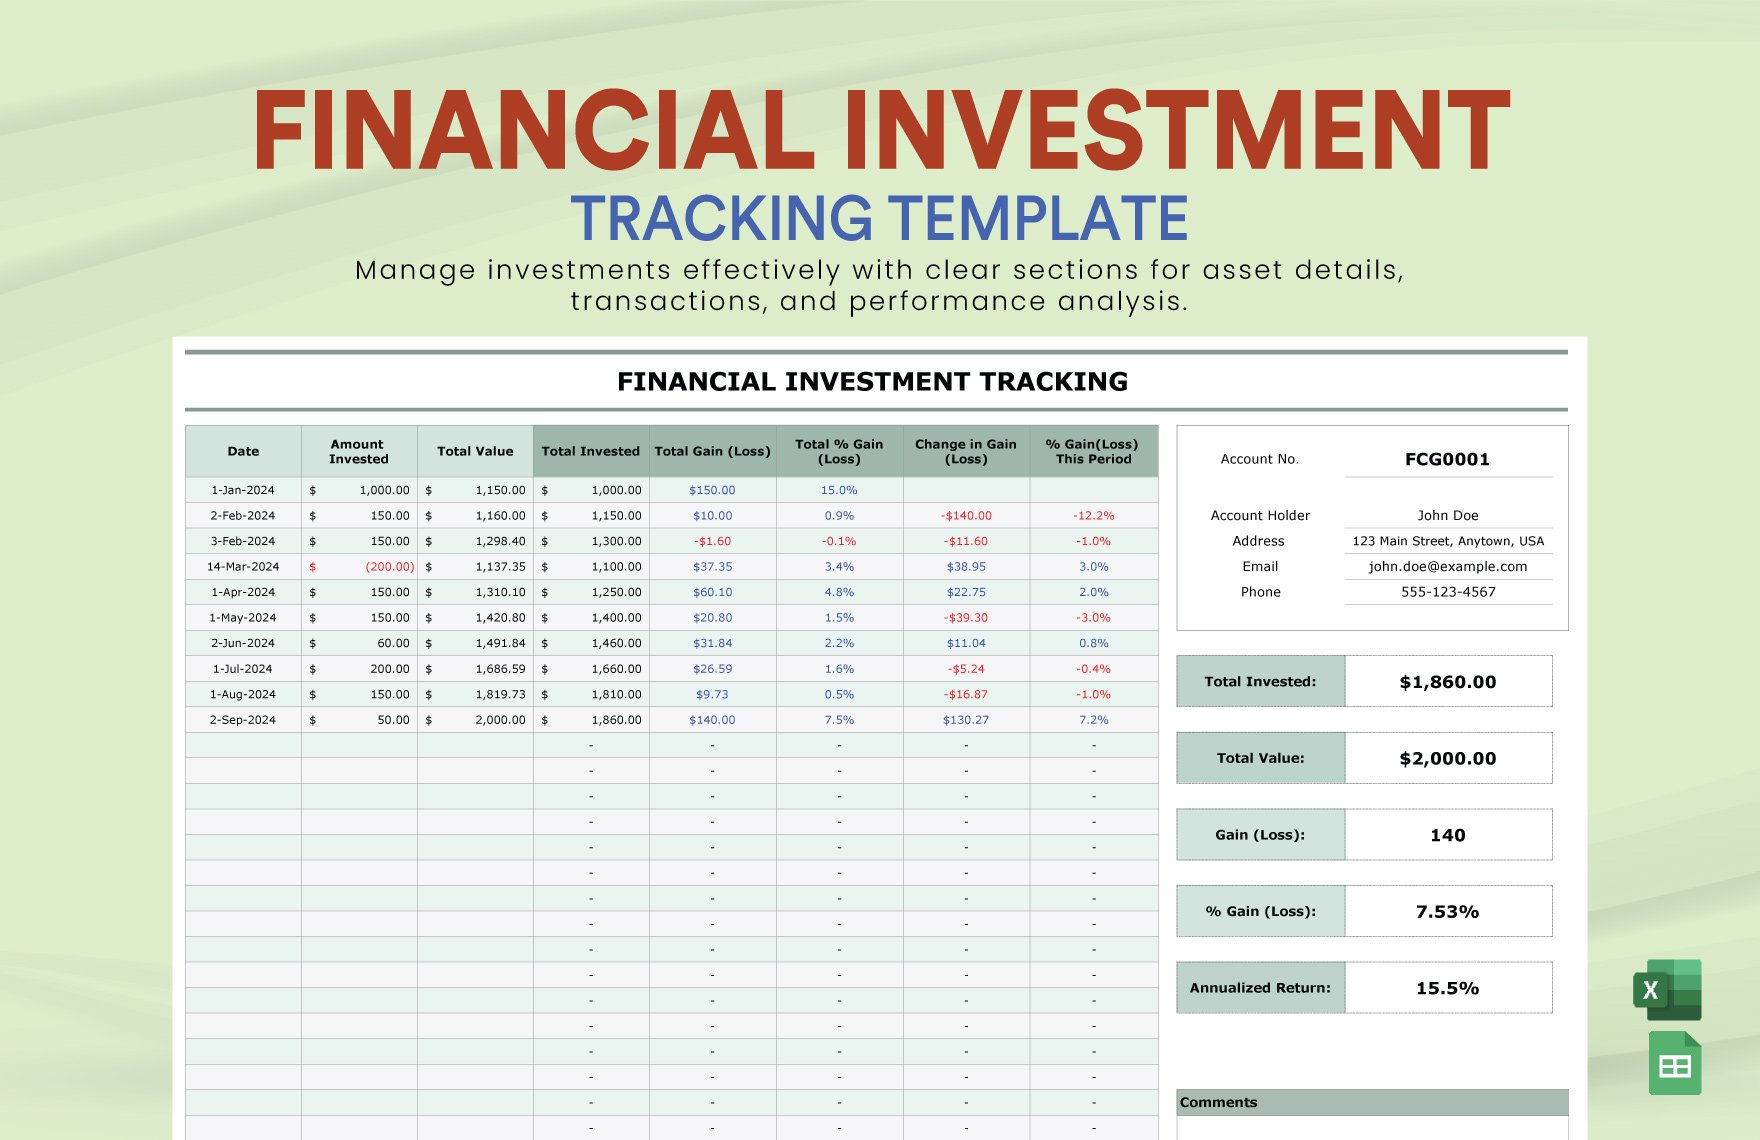 Financial Investment Tracking Template in Excel, Google Sheets